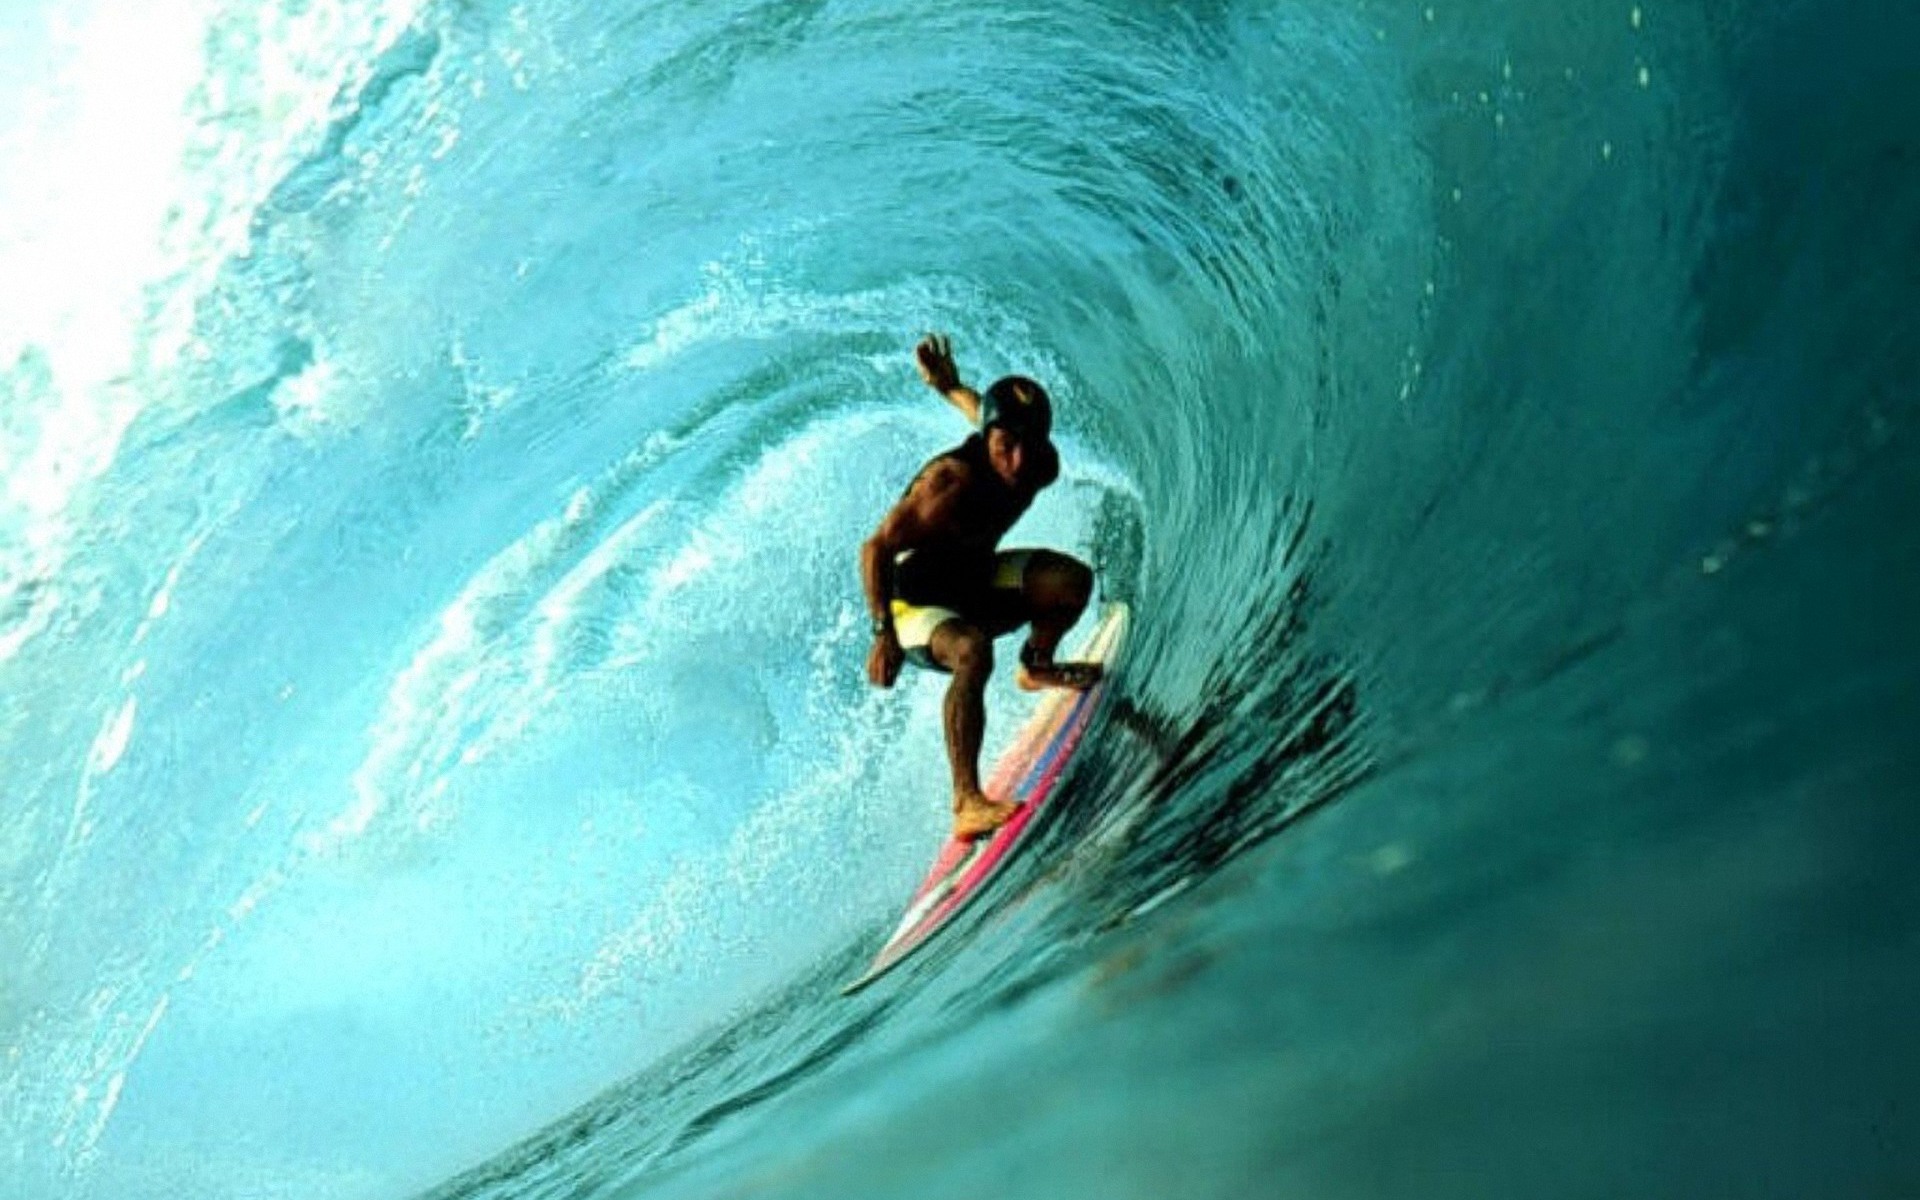 Surfing wallpaper 1920x1200 Wallpapers, 1920x1200 Wallpapers ...